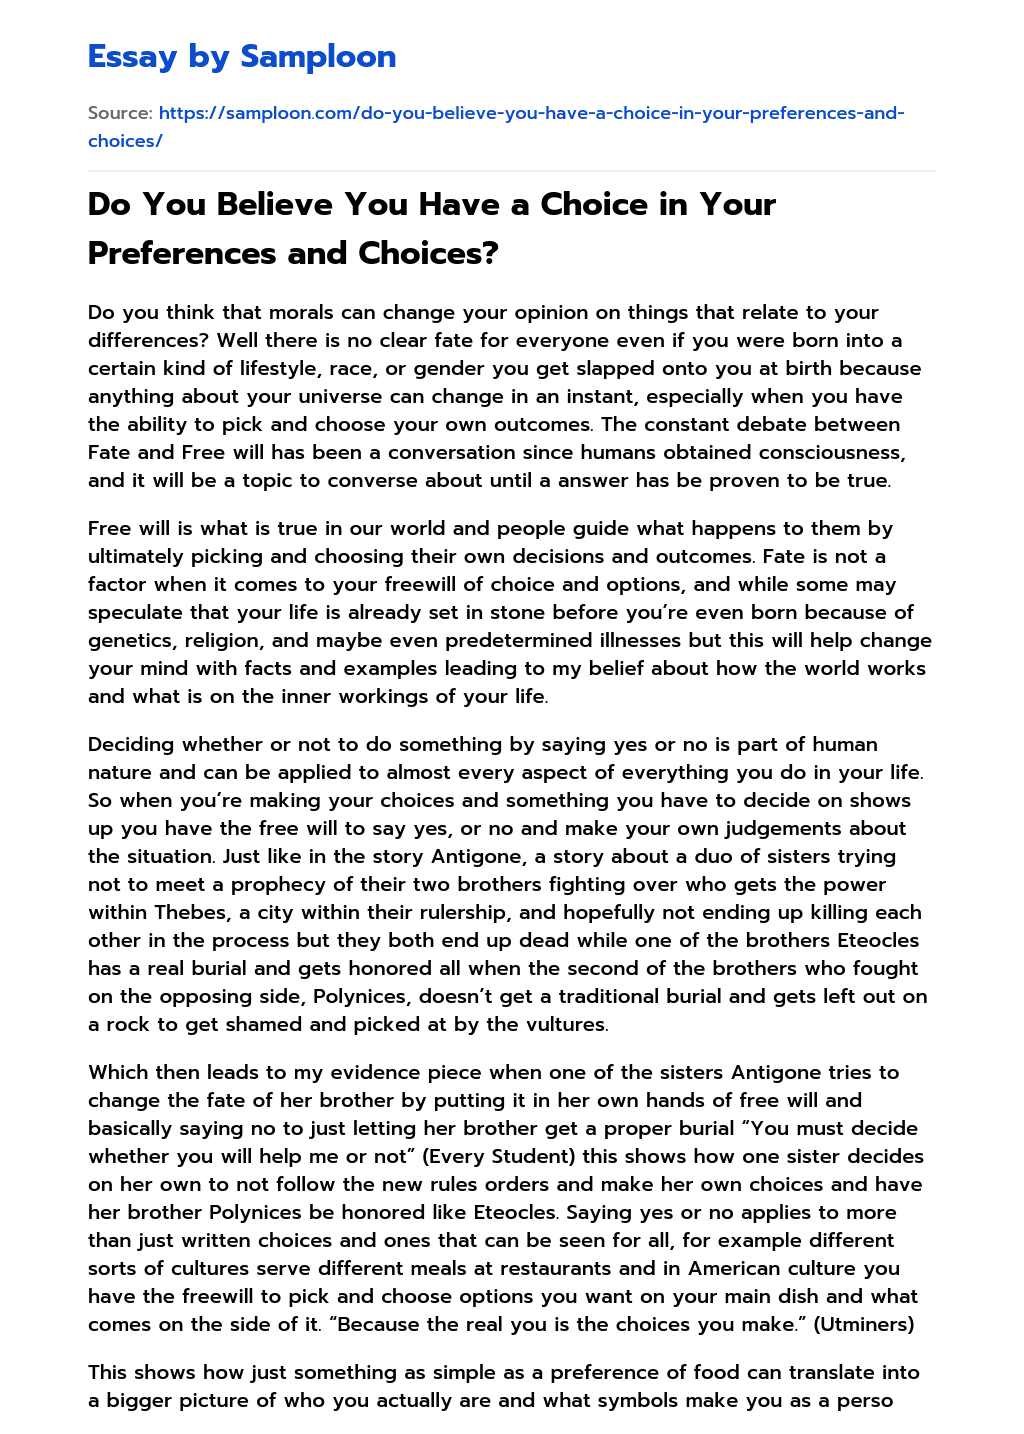 Do You Believe You Have a Choice in Your Preferences and Choices? essay